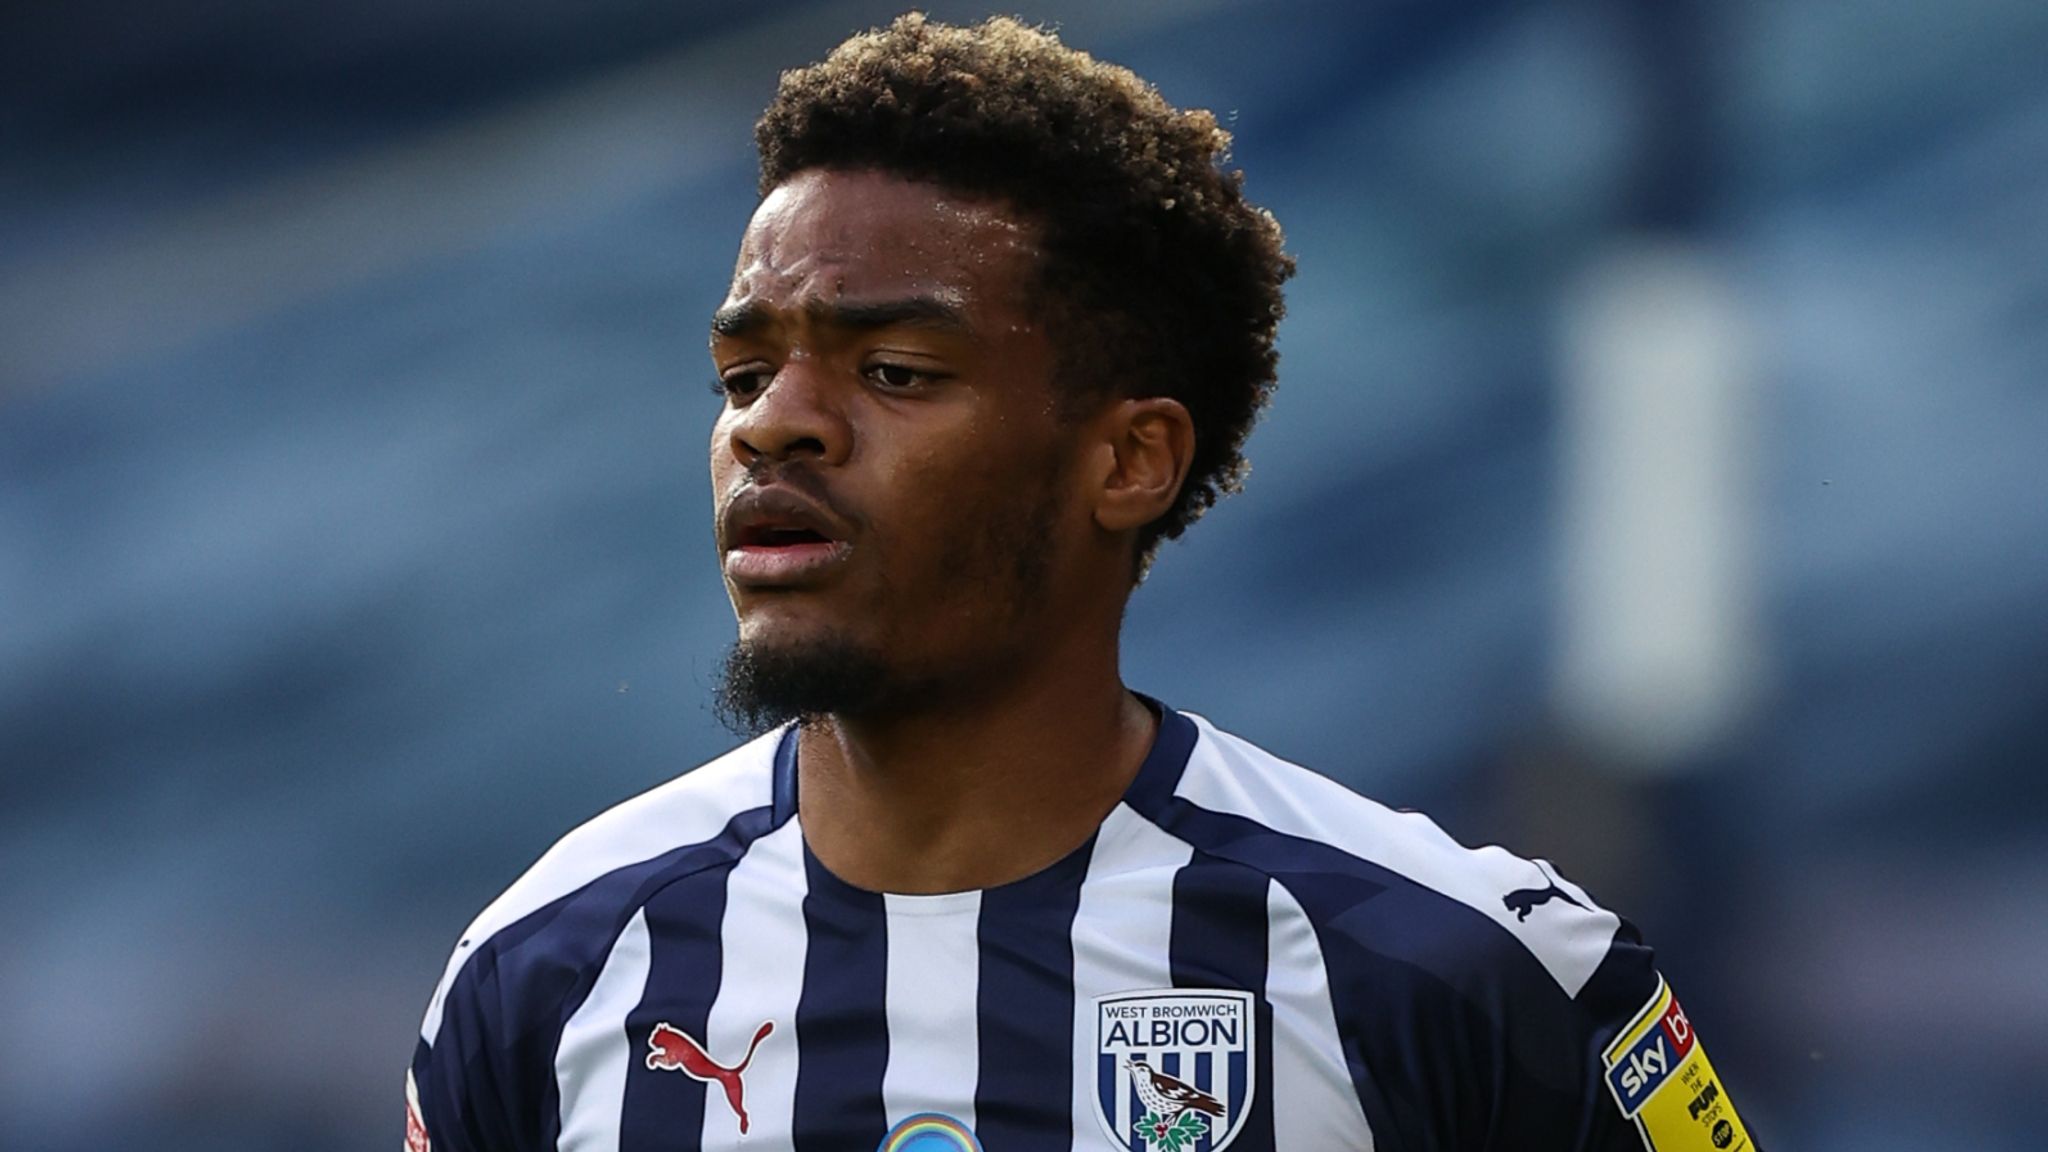 West Brom Sign Grady Diangana From West Ham Mark Noble Angry Football News Sky Sports